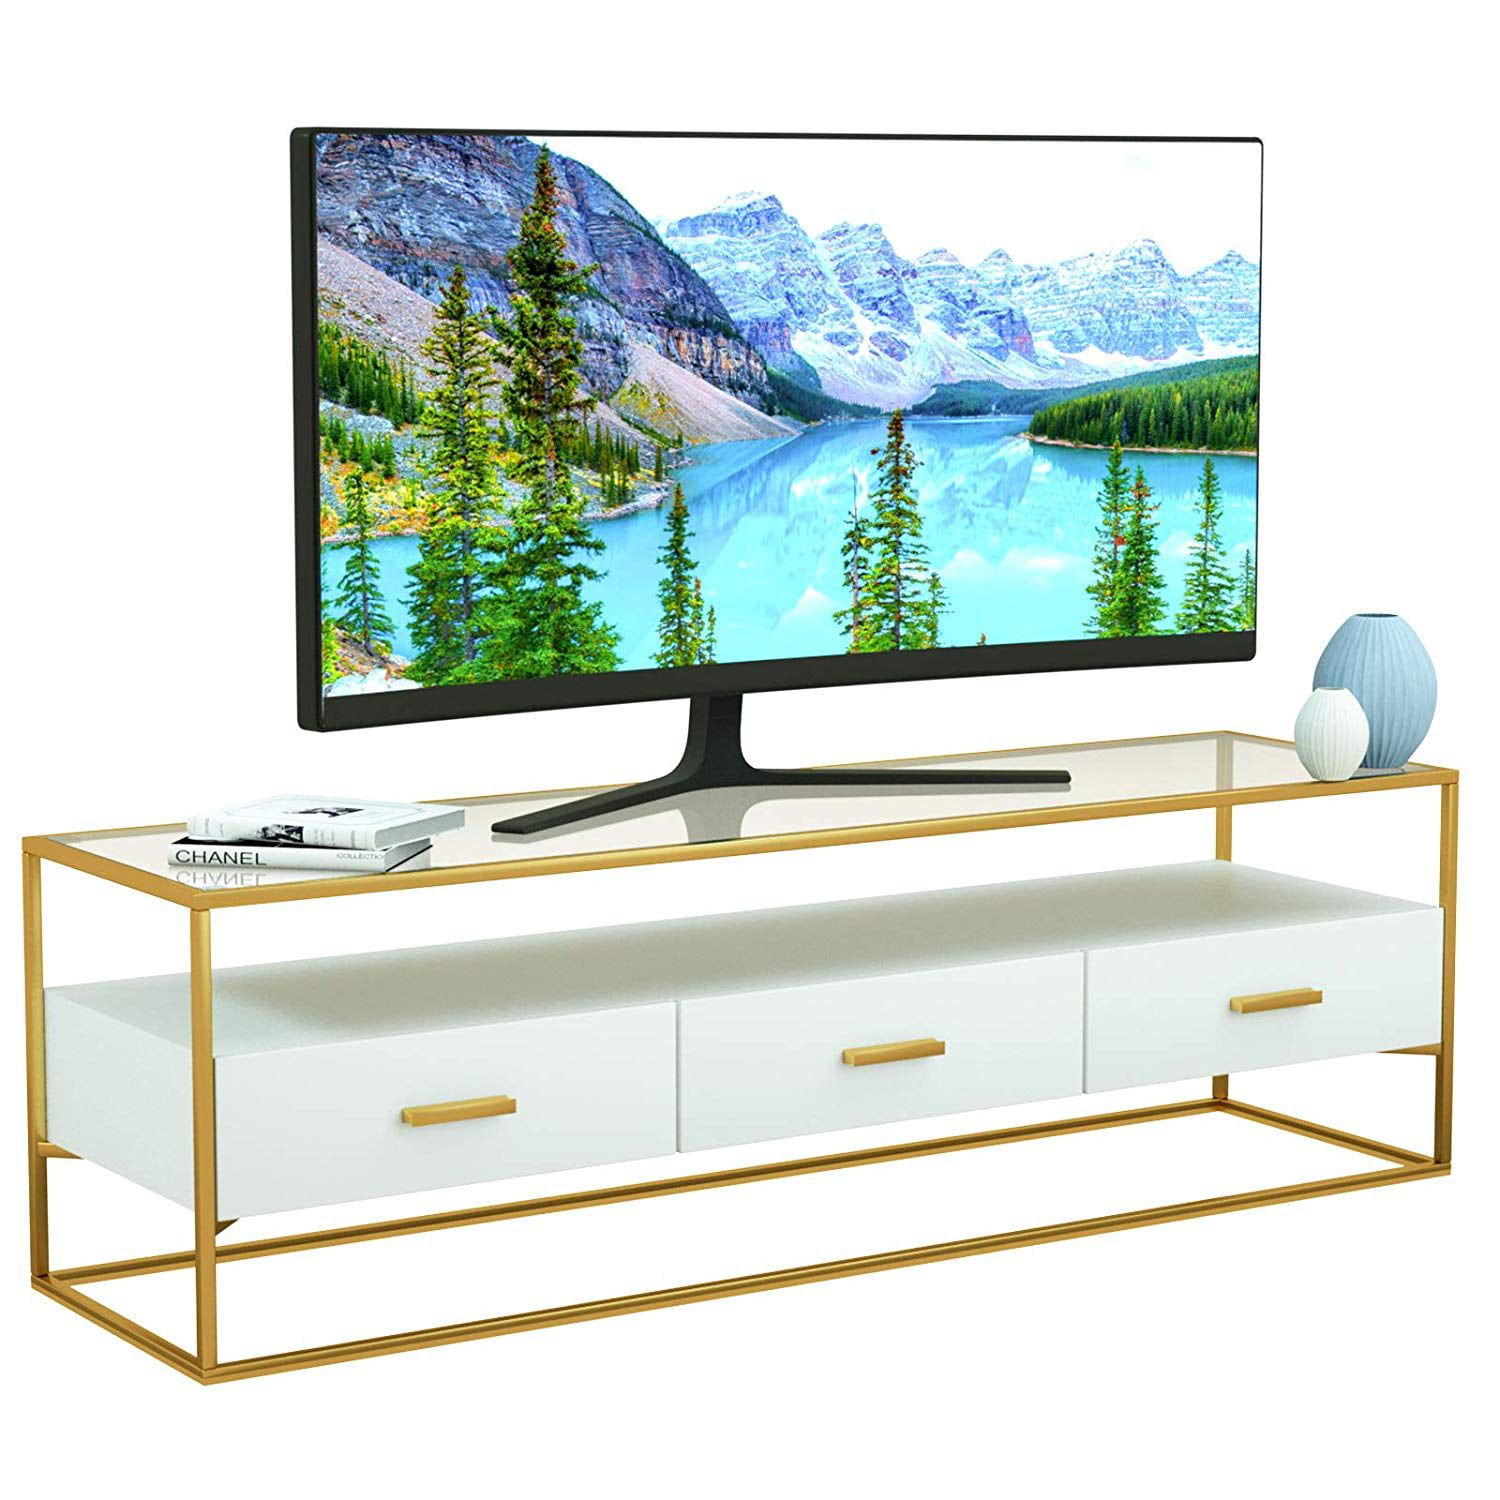 Mecor White Tv Stand,entertainment Center High Gloss 59 Inch Width,3 Regarding White Tv Stands Entertainment Center (View 6 of 20)